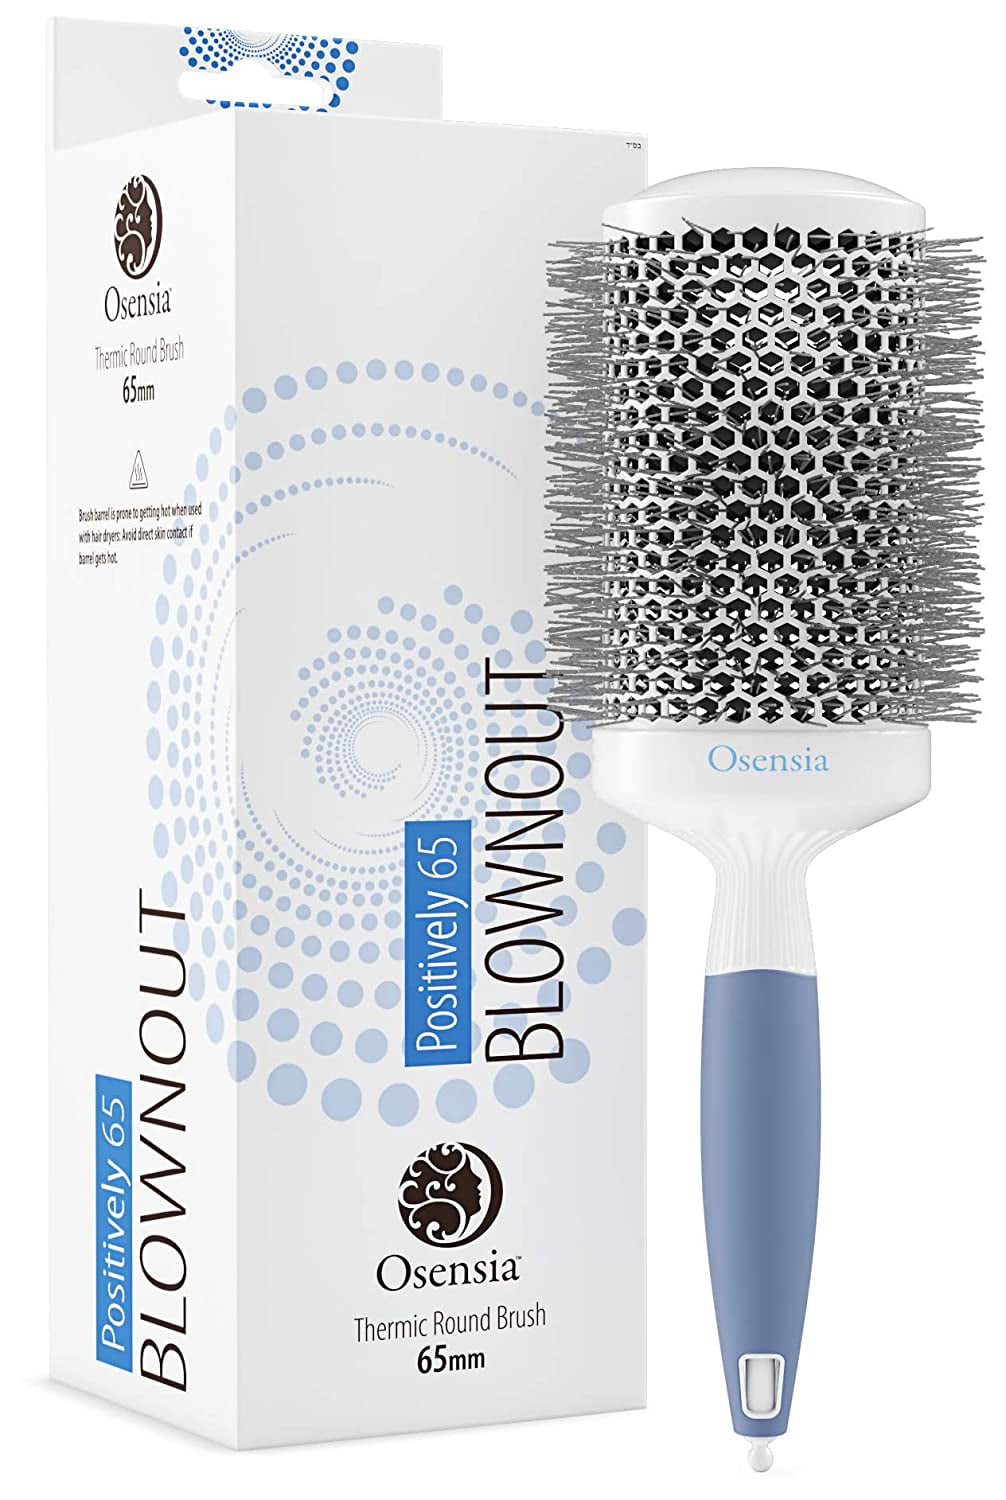 Osensia Blownout Extra Large Ceramic Ion Round Harir Dryer Brush for Blow  Drying, 2.5 inch - Walmart.com